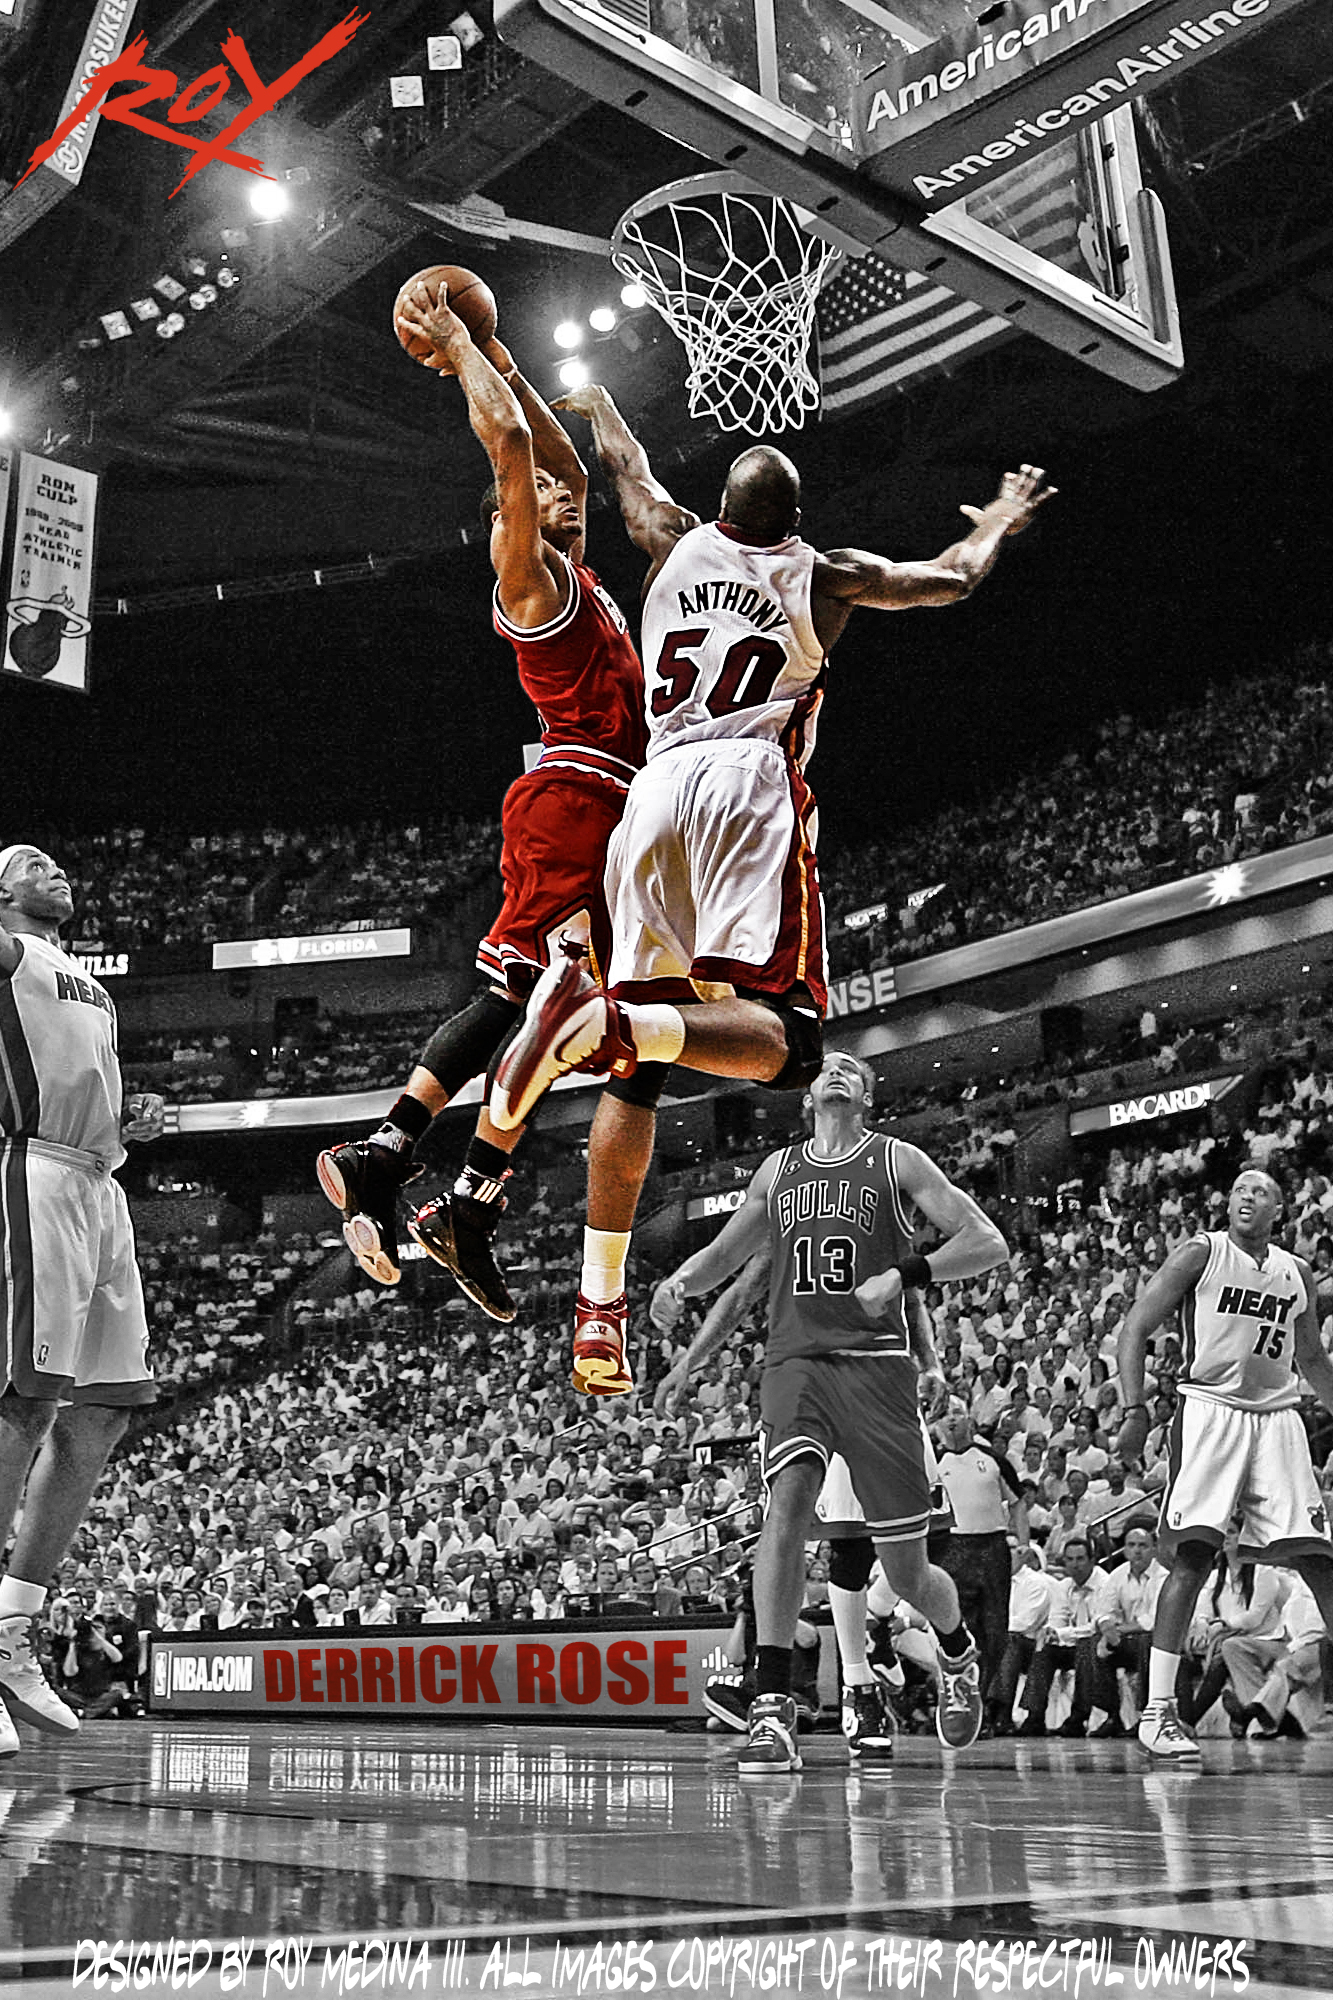  wallpaper iphone ipod touch 2011 2015 roy03x derrick rose iphone